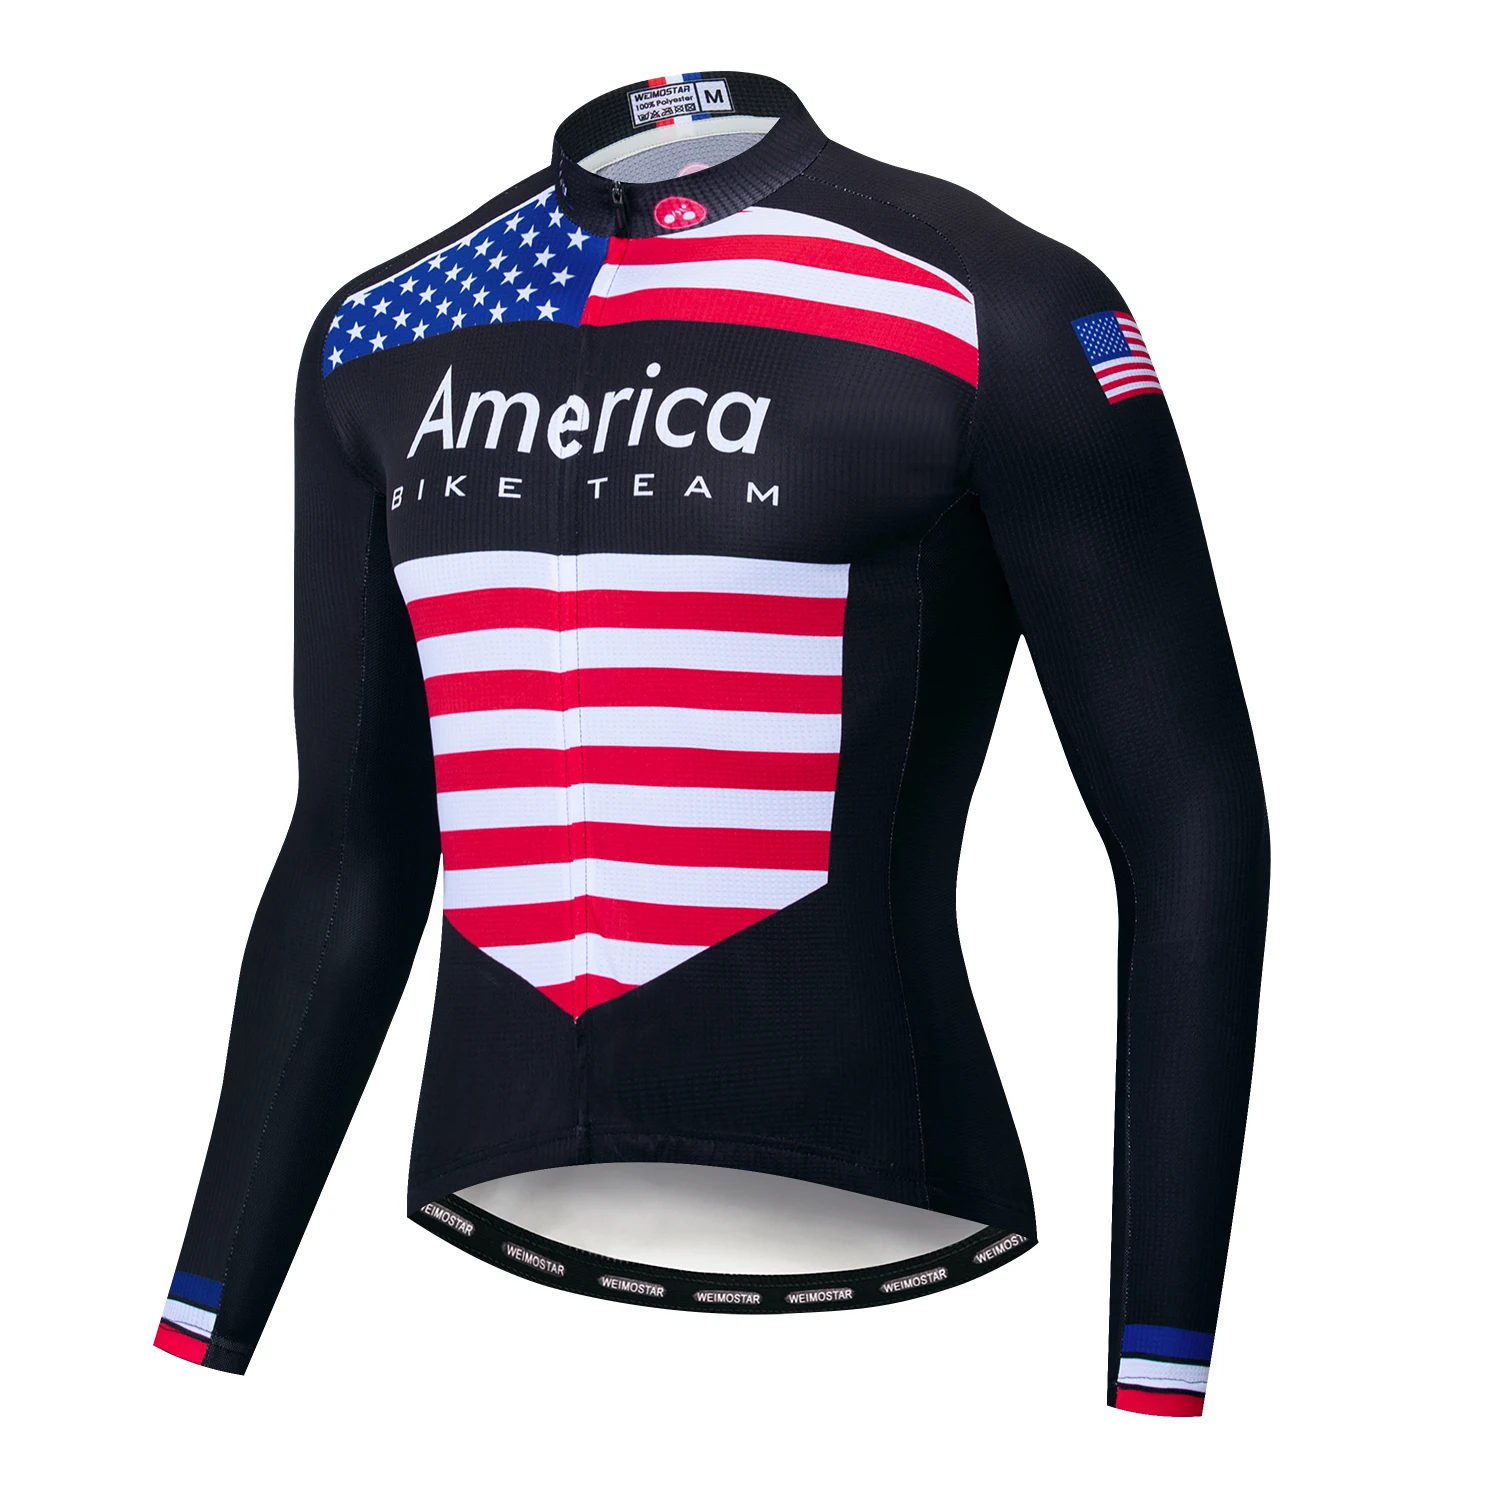 New Men Team Cycling Long Sleeve Tops Bicycle Jersey Racing Clothing Sports Wear 